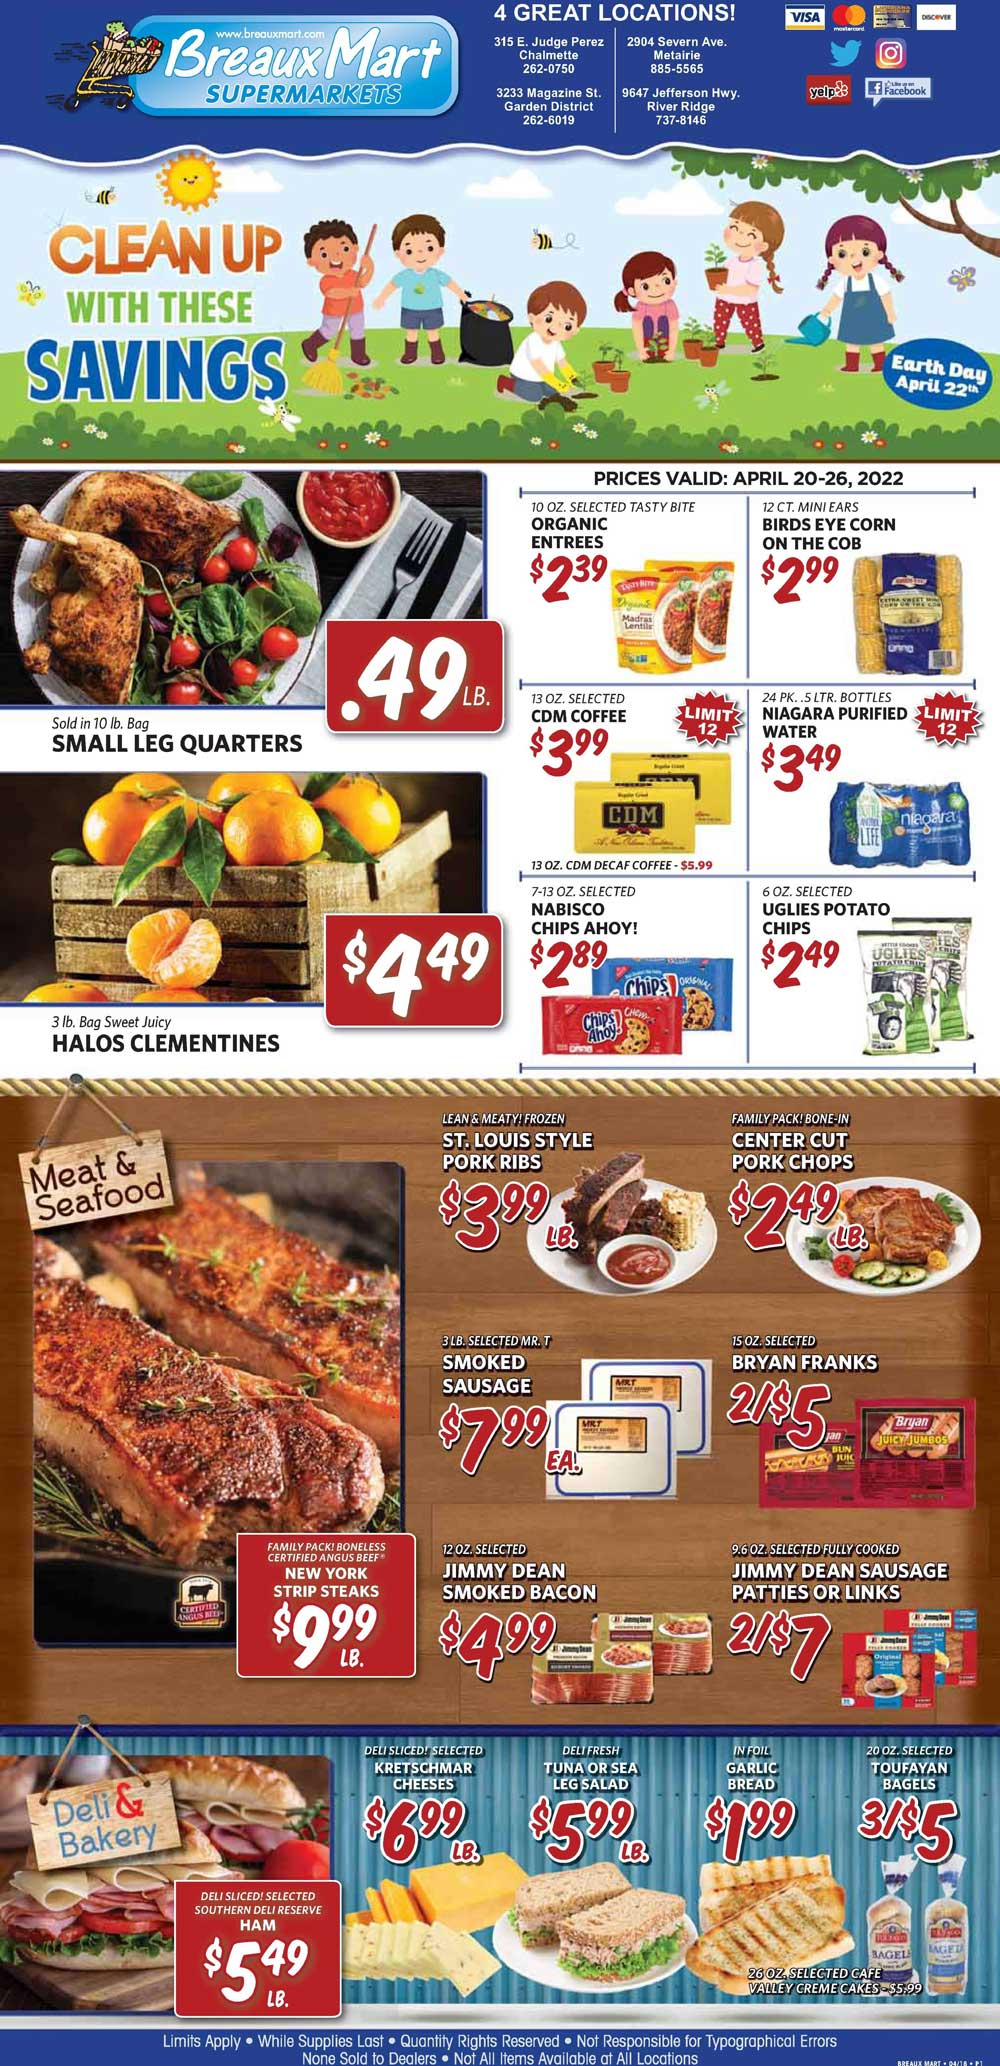 Breaux Mart Weekly Ad (4/20/22 - 4/26/22)